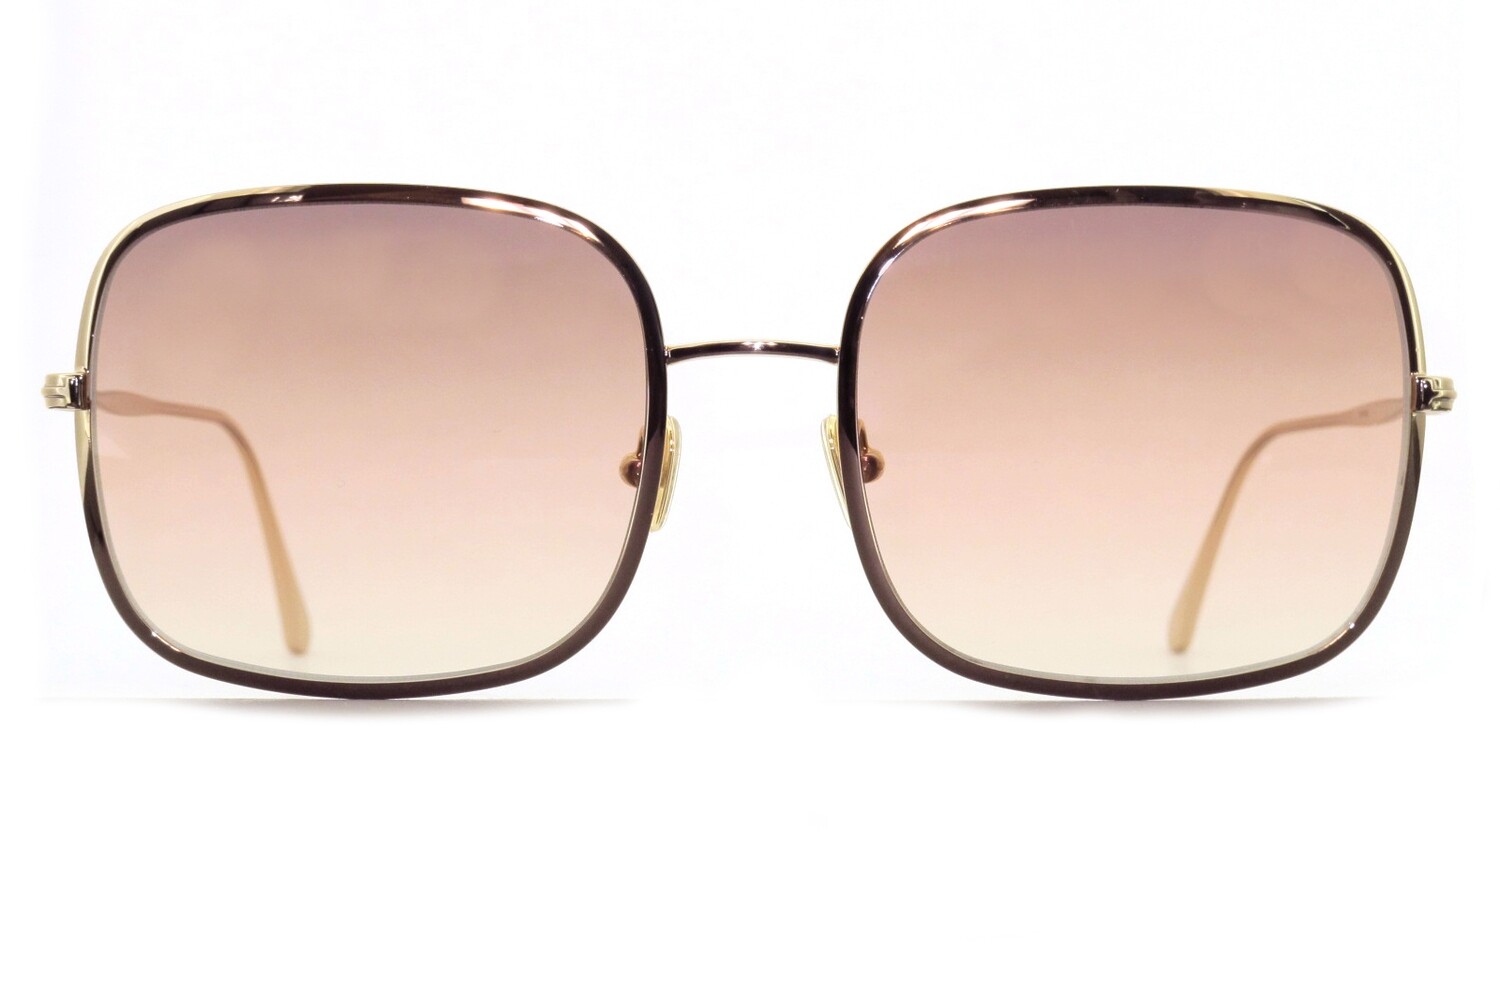 Keira TF865 by Tom Ford